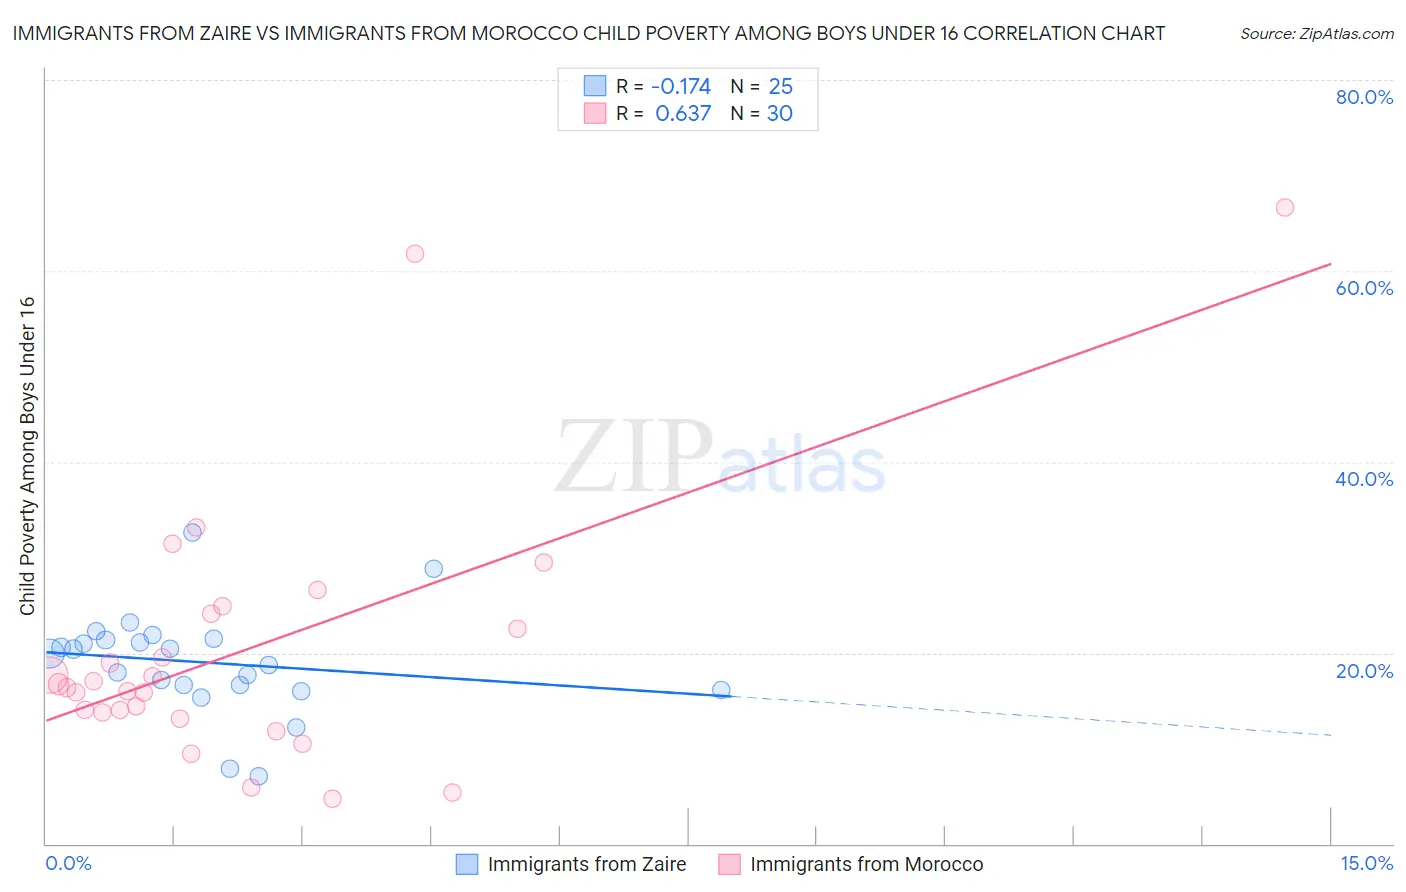 Immigrants from Zaire vs Immigrants from Morocco Child Poverty Among Boys Under 16